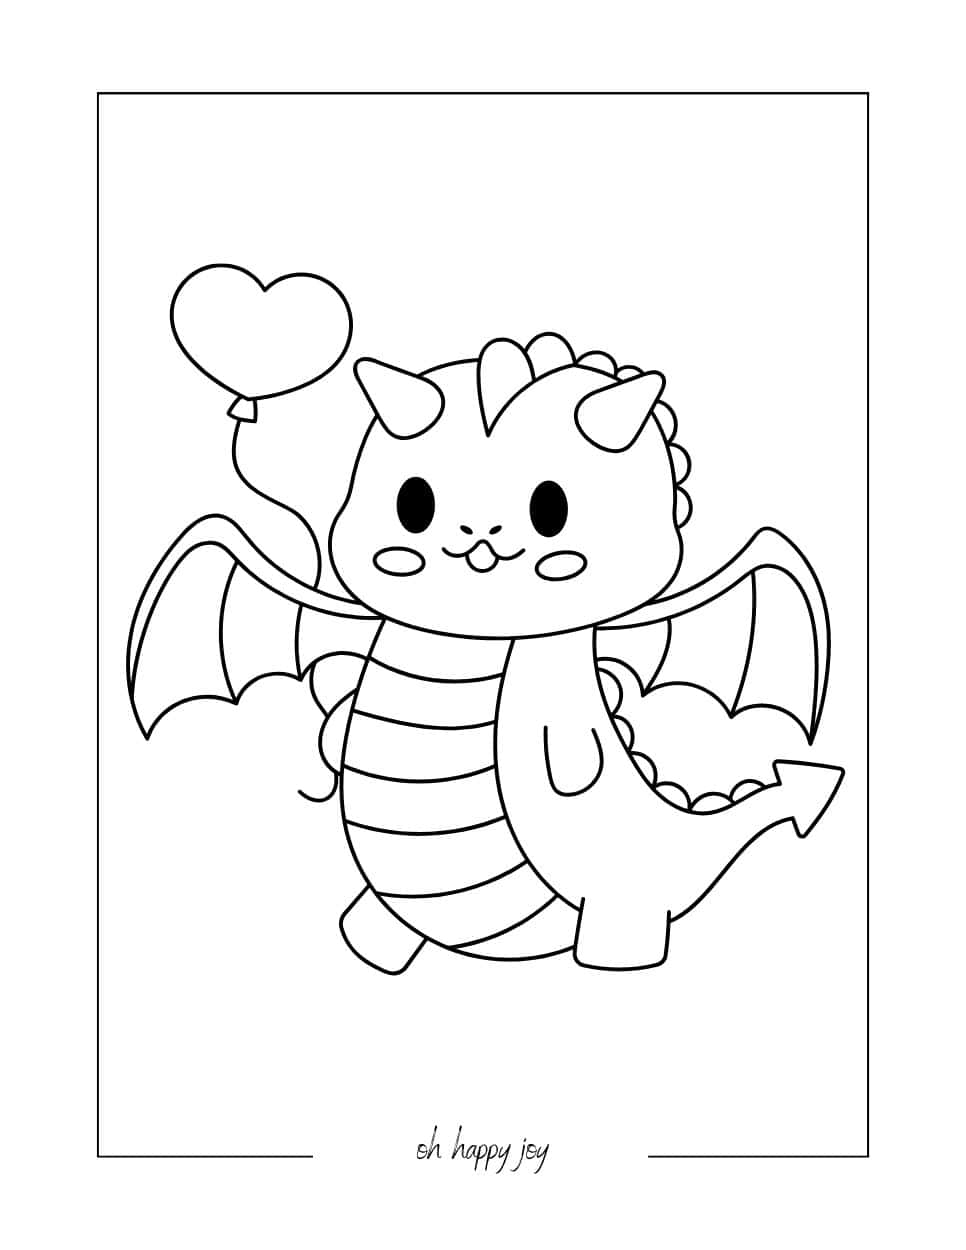 Dragon with Balloon Coloring Page